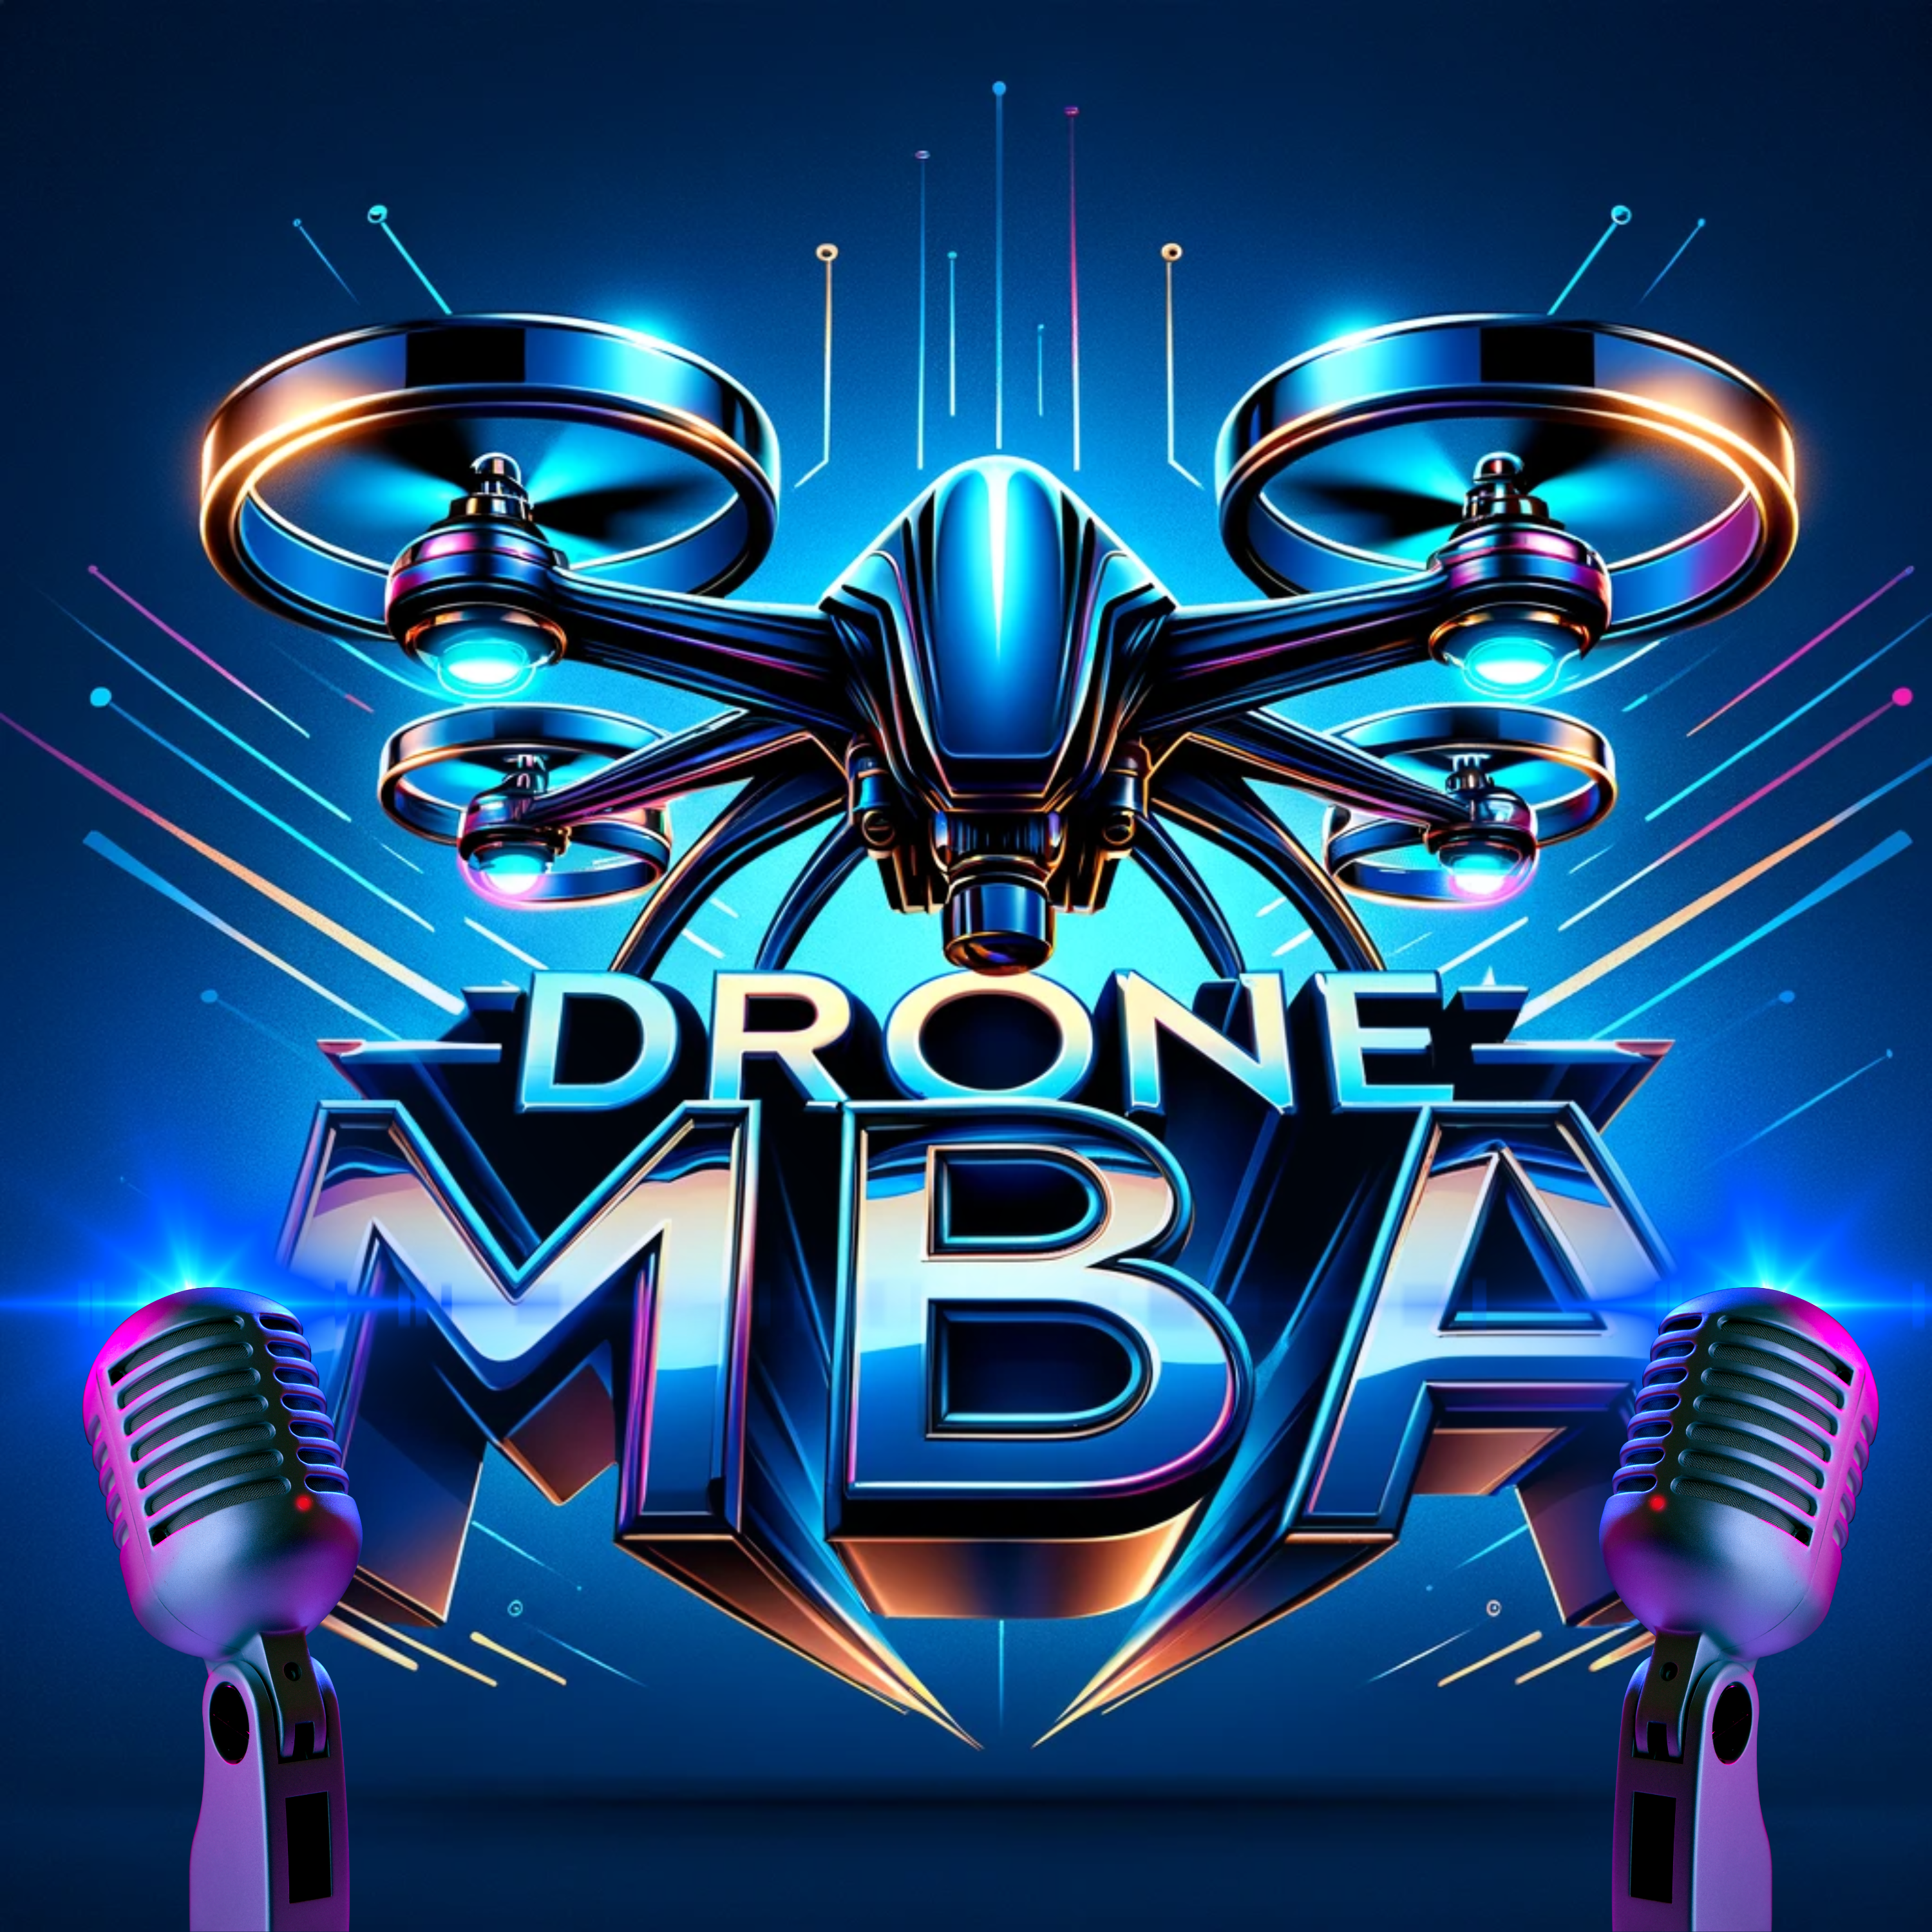 Drone MBA